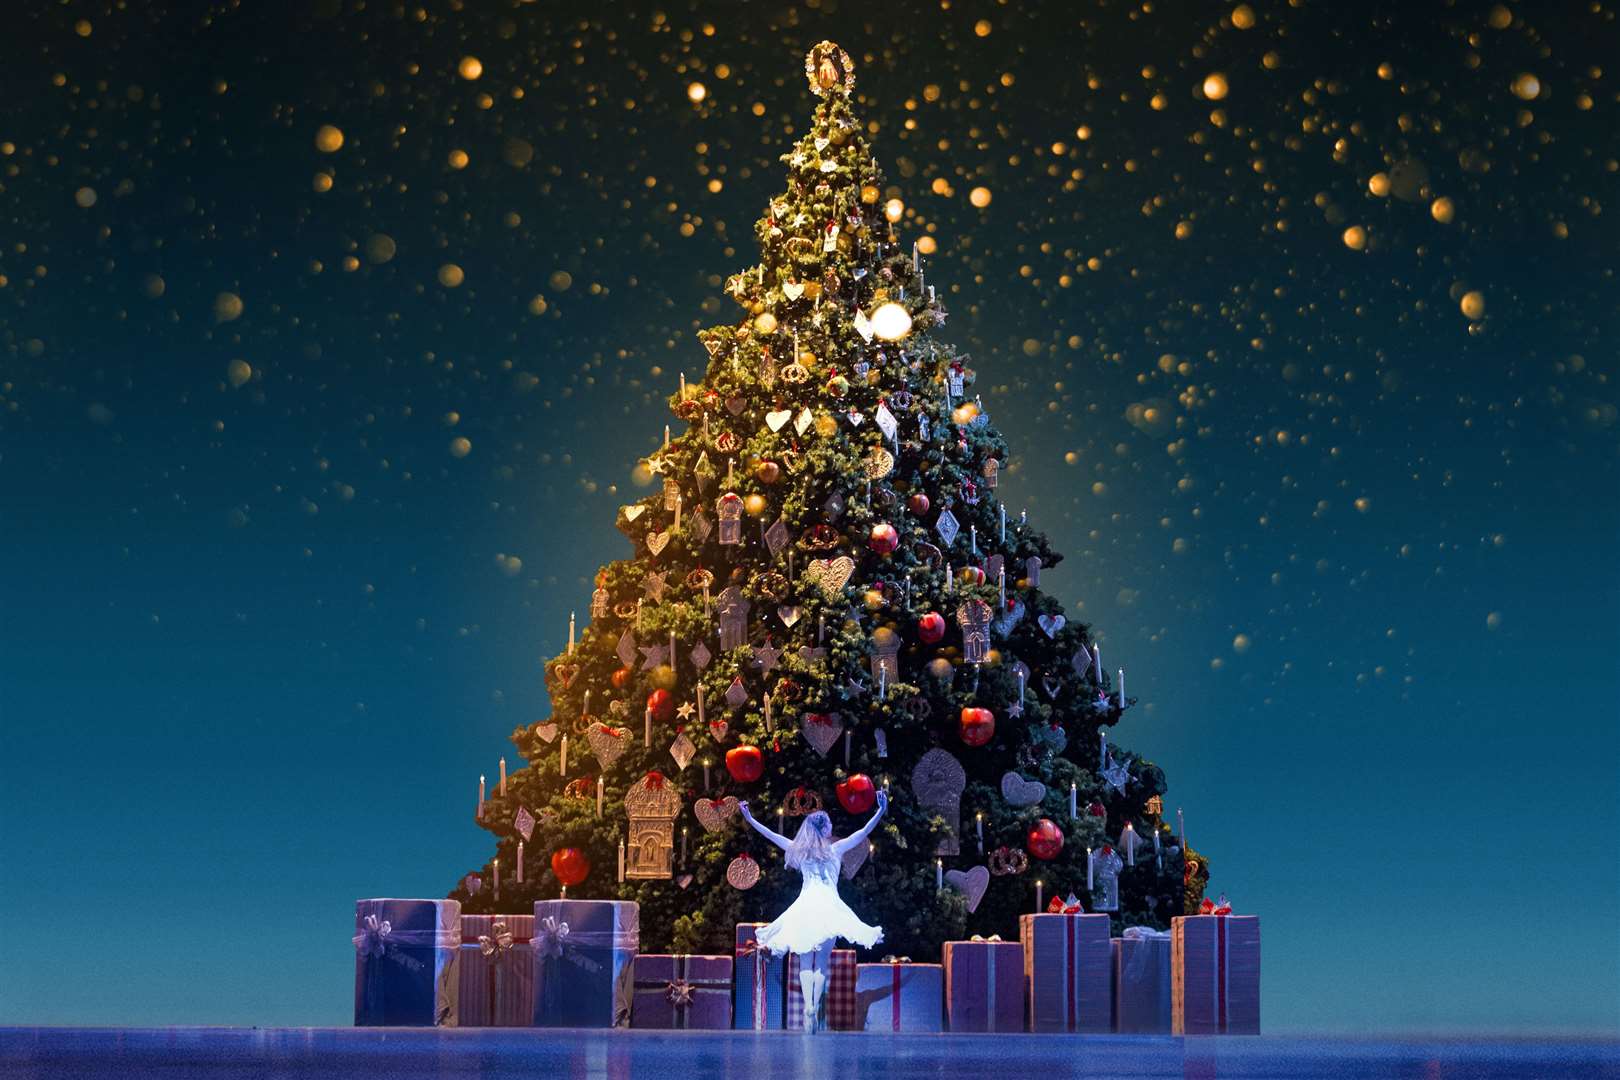 A family favourite at Christmas time, the Nutcracker is regarded as one of the most delightful ways to discover the enchantment of ballet.